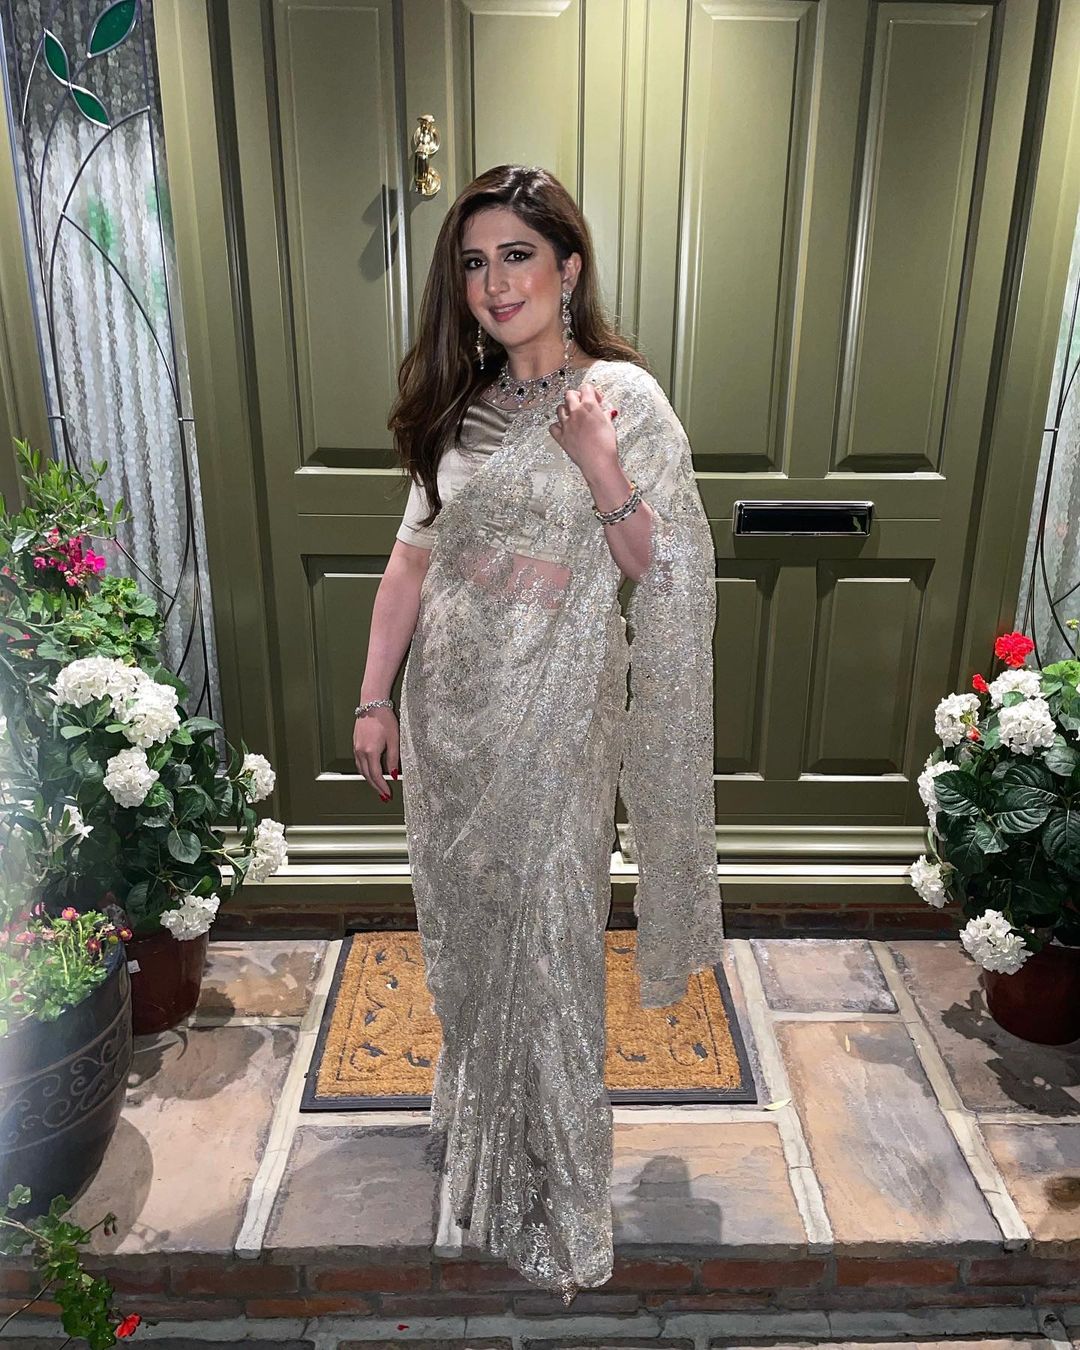 Chantilly Lace Saree With Rhinestone Detailing